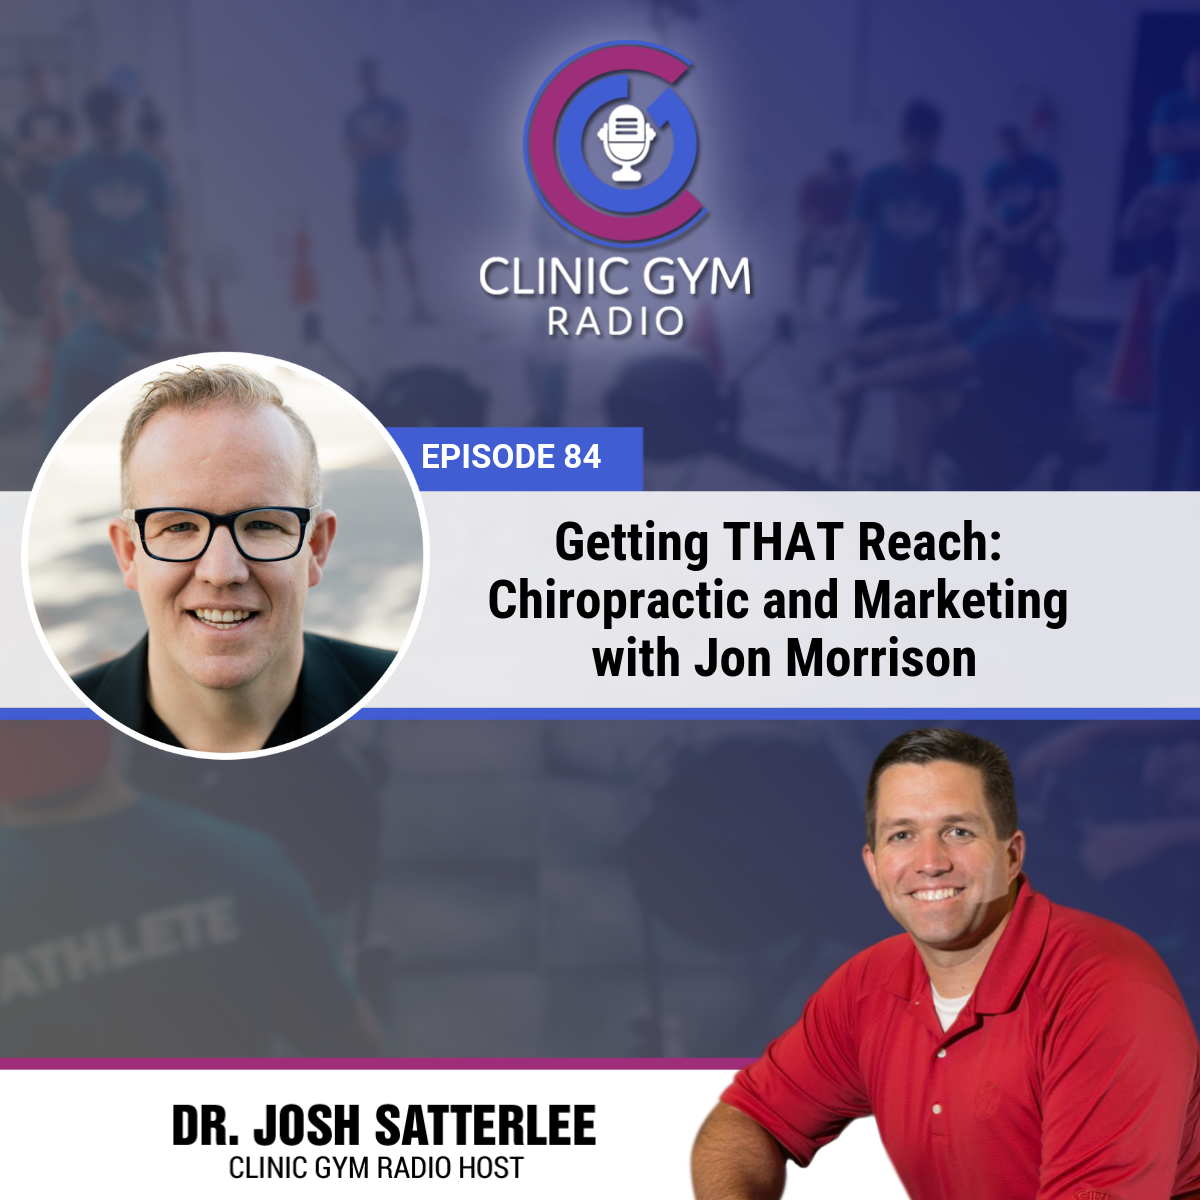 Getting THAT Reach: Chiropractic and Marketing with Jon Morrison